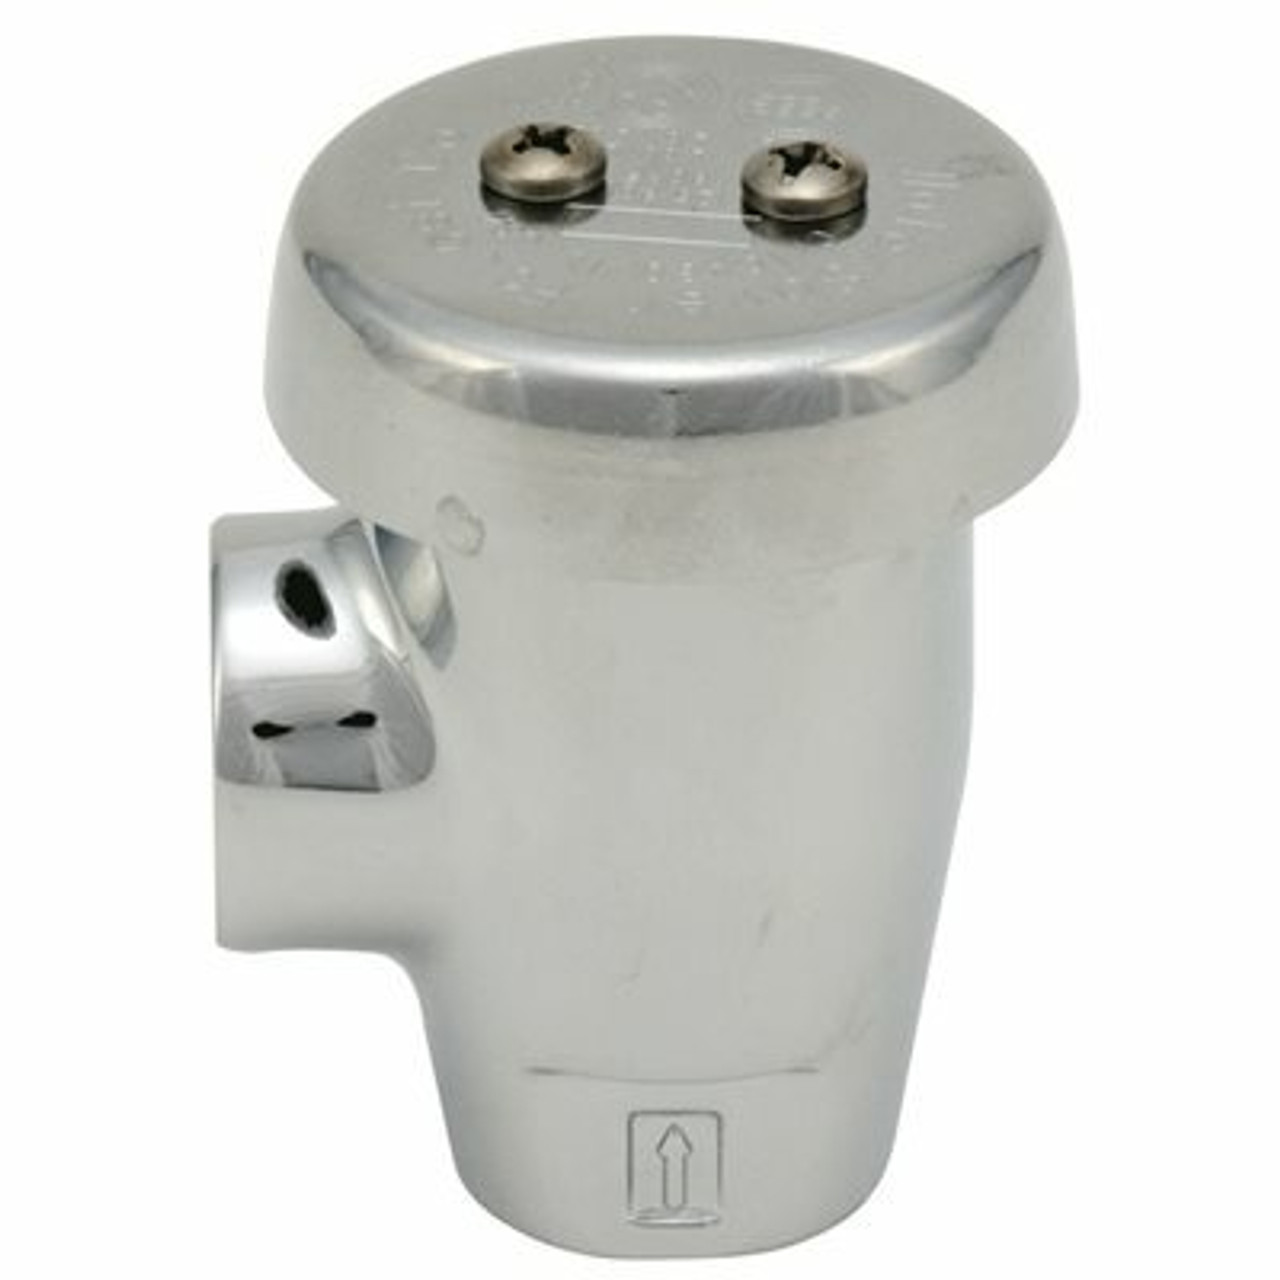 Watersaver Faucet Co Watersaver Angle Vacuum Breaker Chrome Plated 3/8"